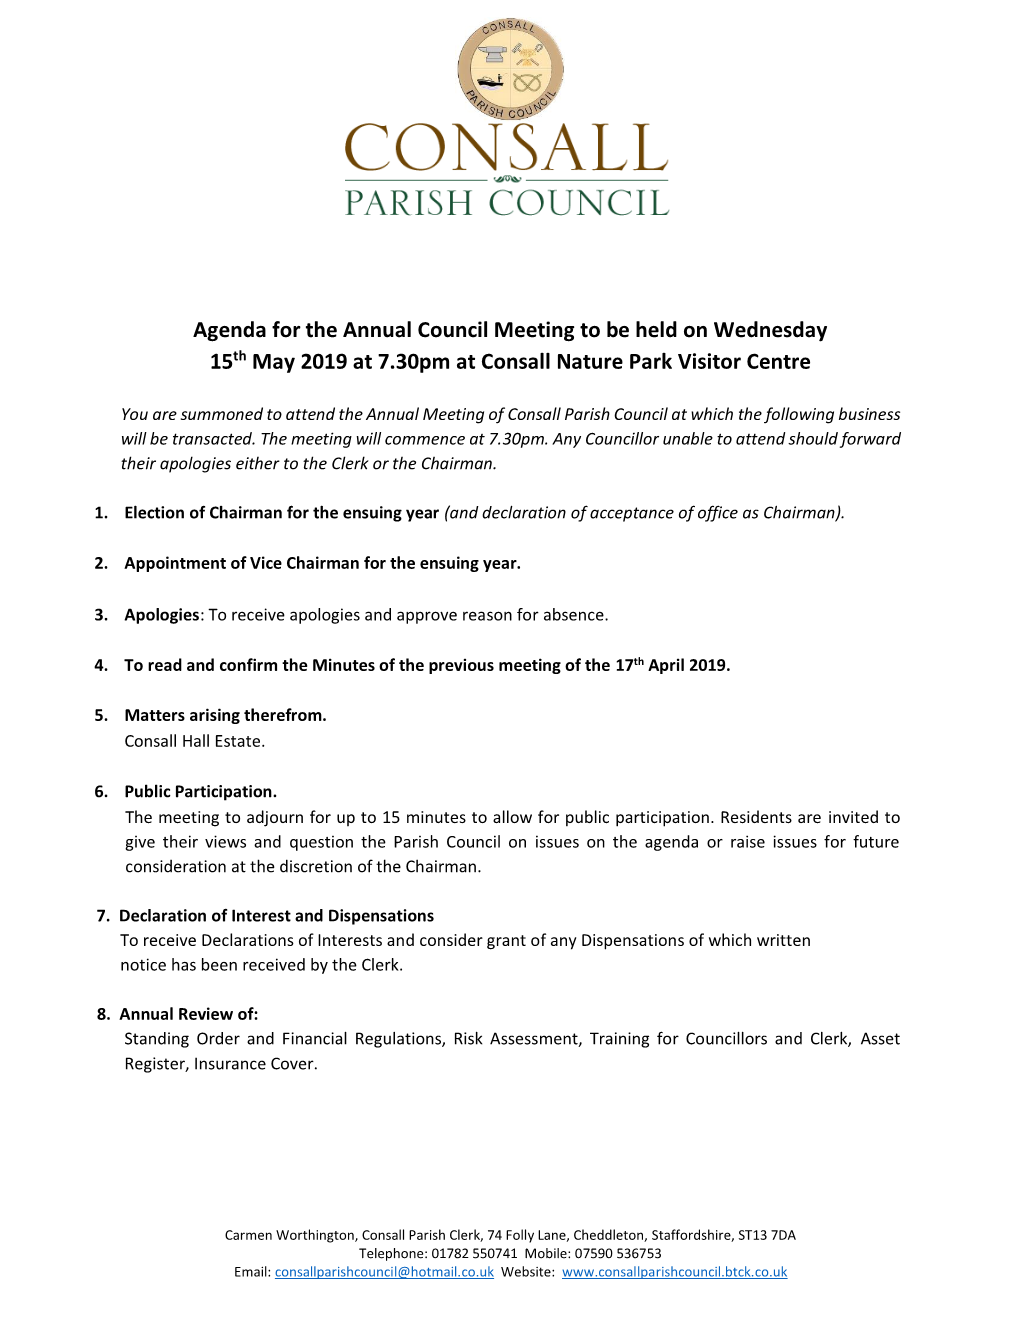 Agenda for the Annual Council Meeting to Be Held on Wednesday 15Th May 2019 at 7.30Pm at Consall Nature Park Visitor Centre